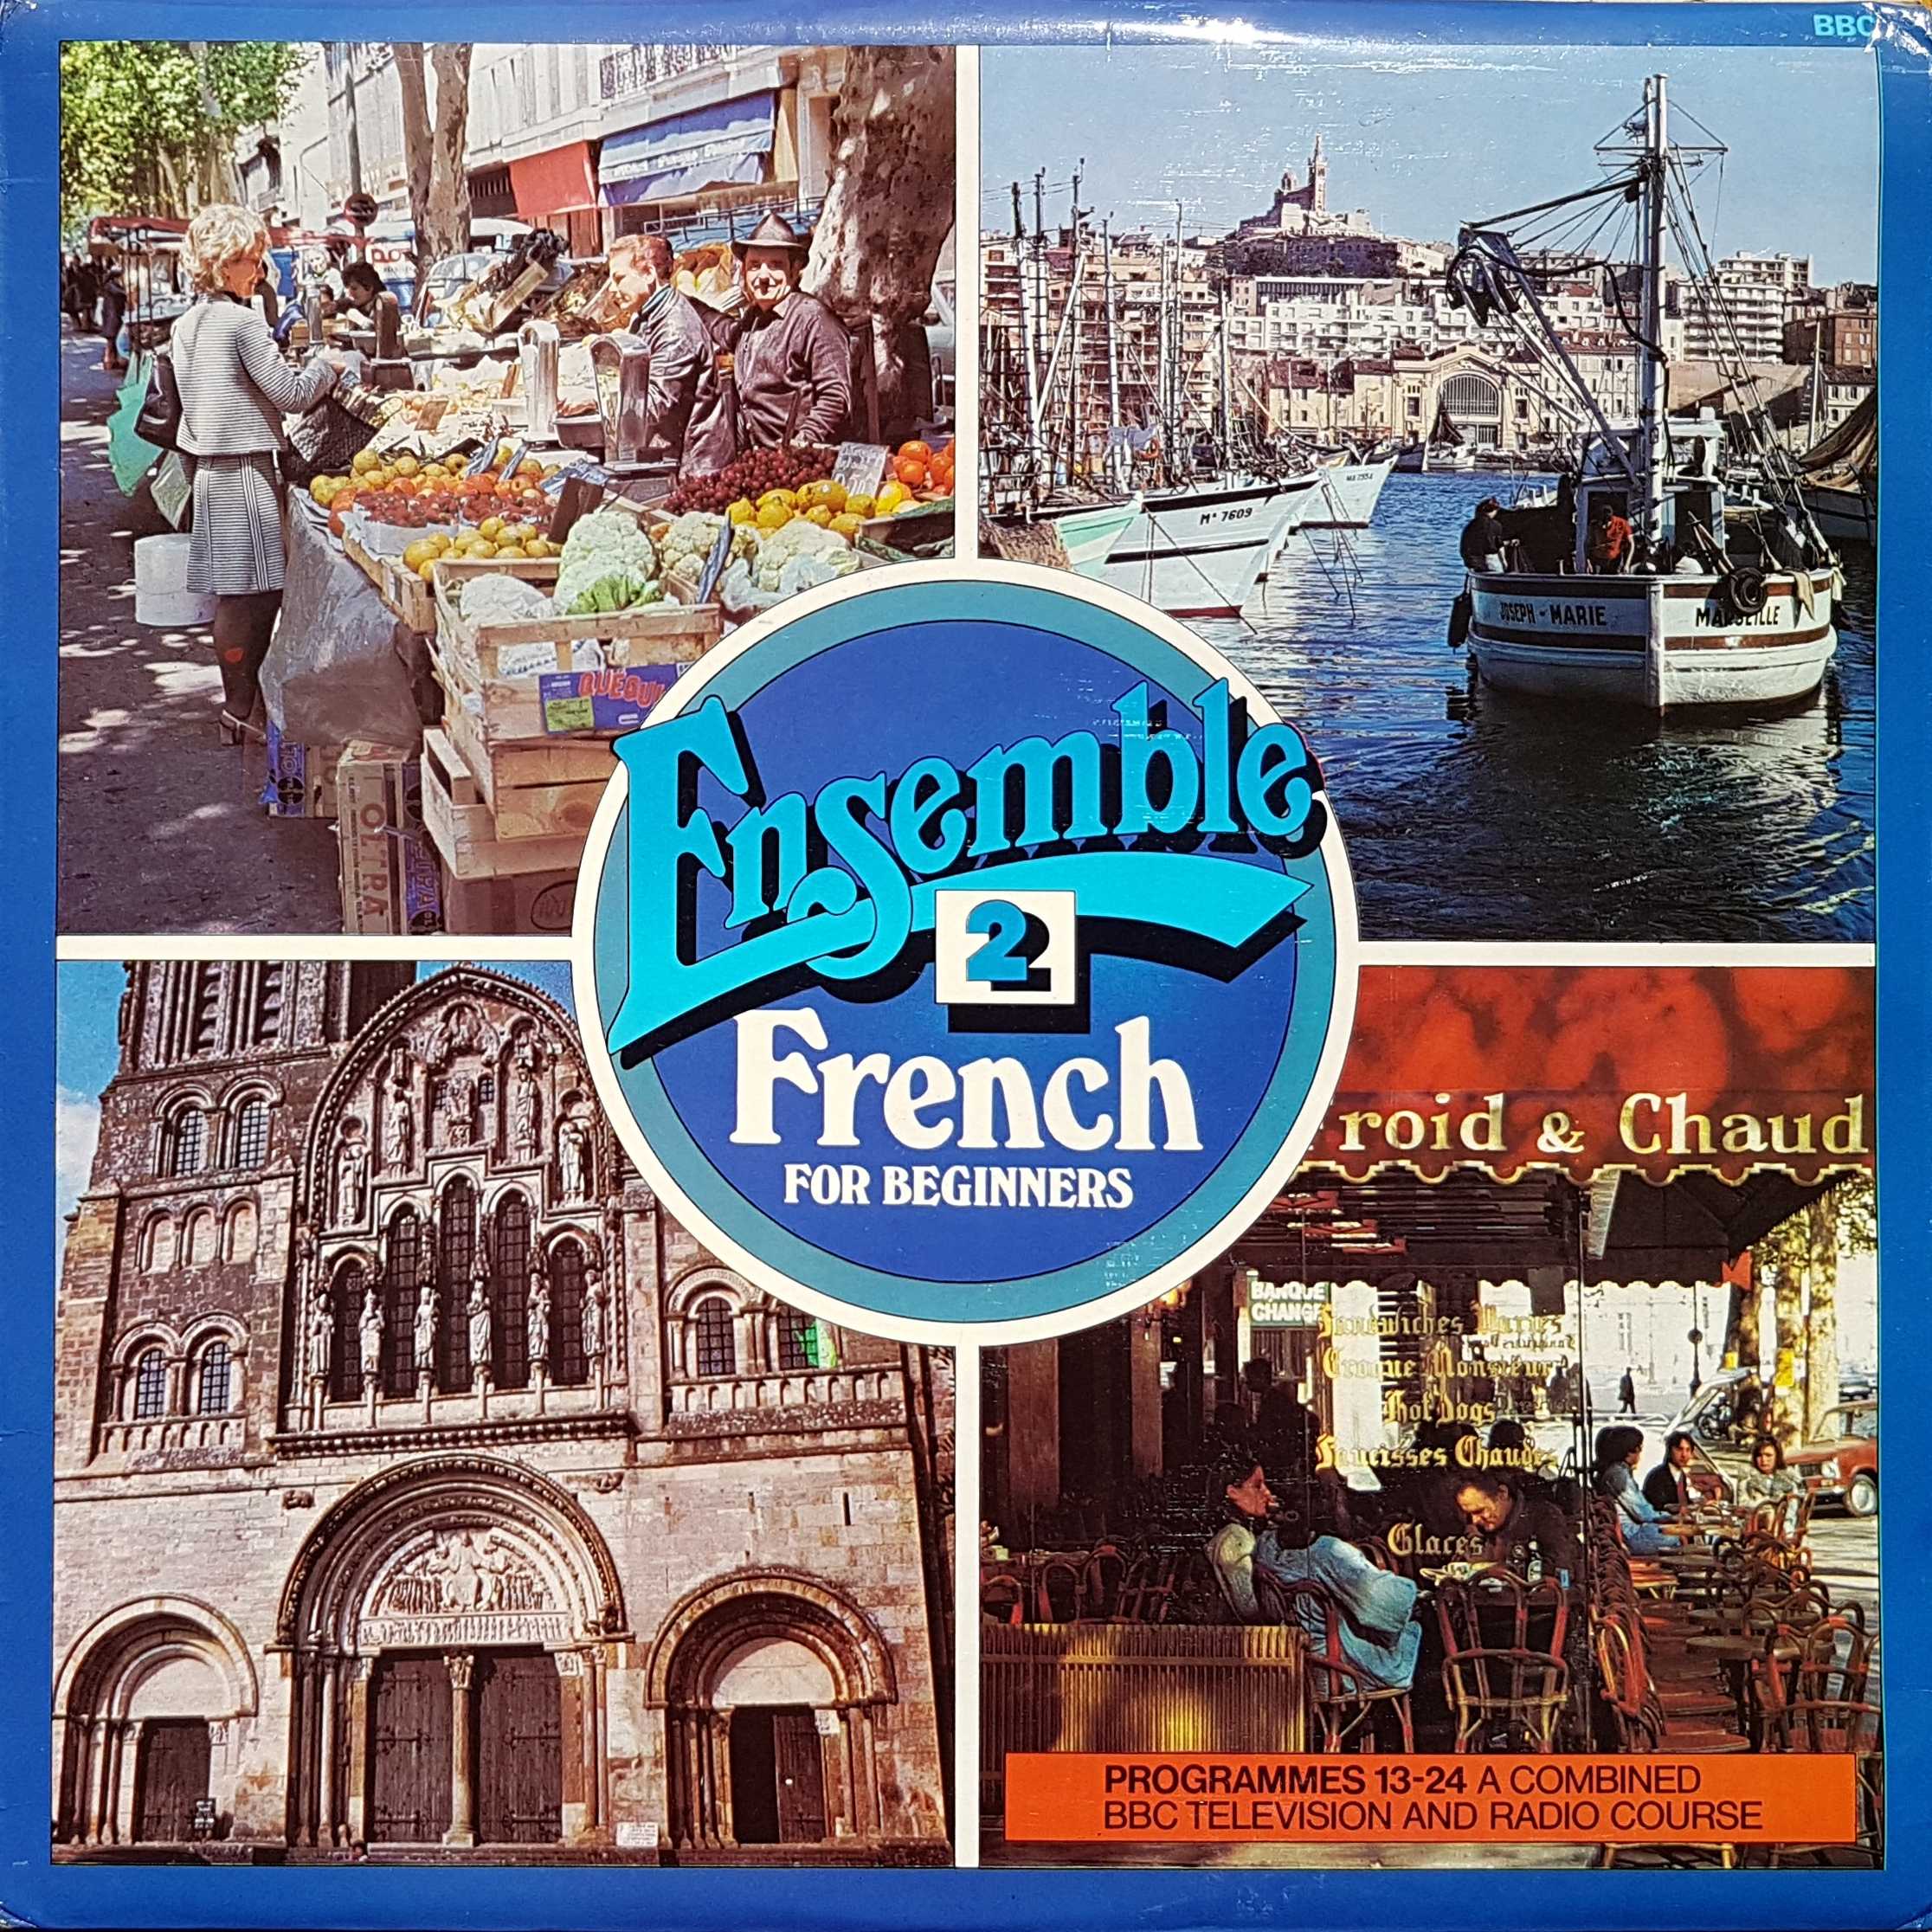 Picture of OP 217 Ensemble 2 - French for beginners - Programmes 13 - 24 by artist Various from the BBC albums - Records and Tapes library